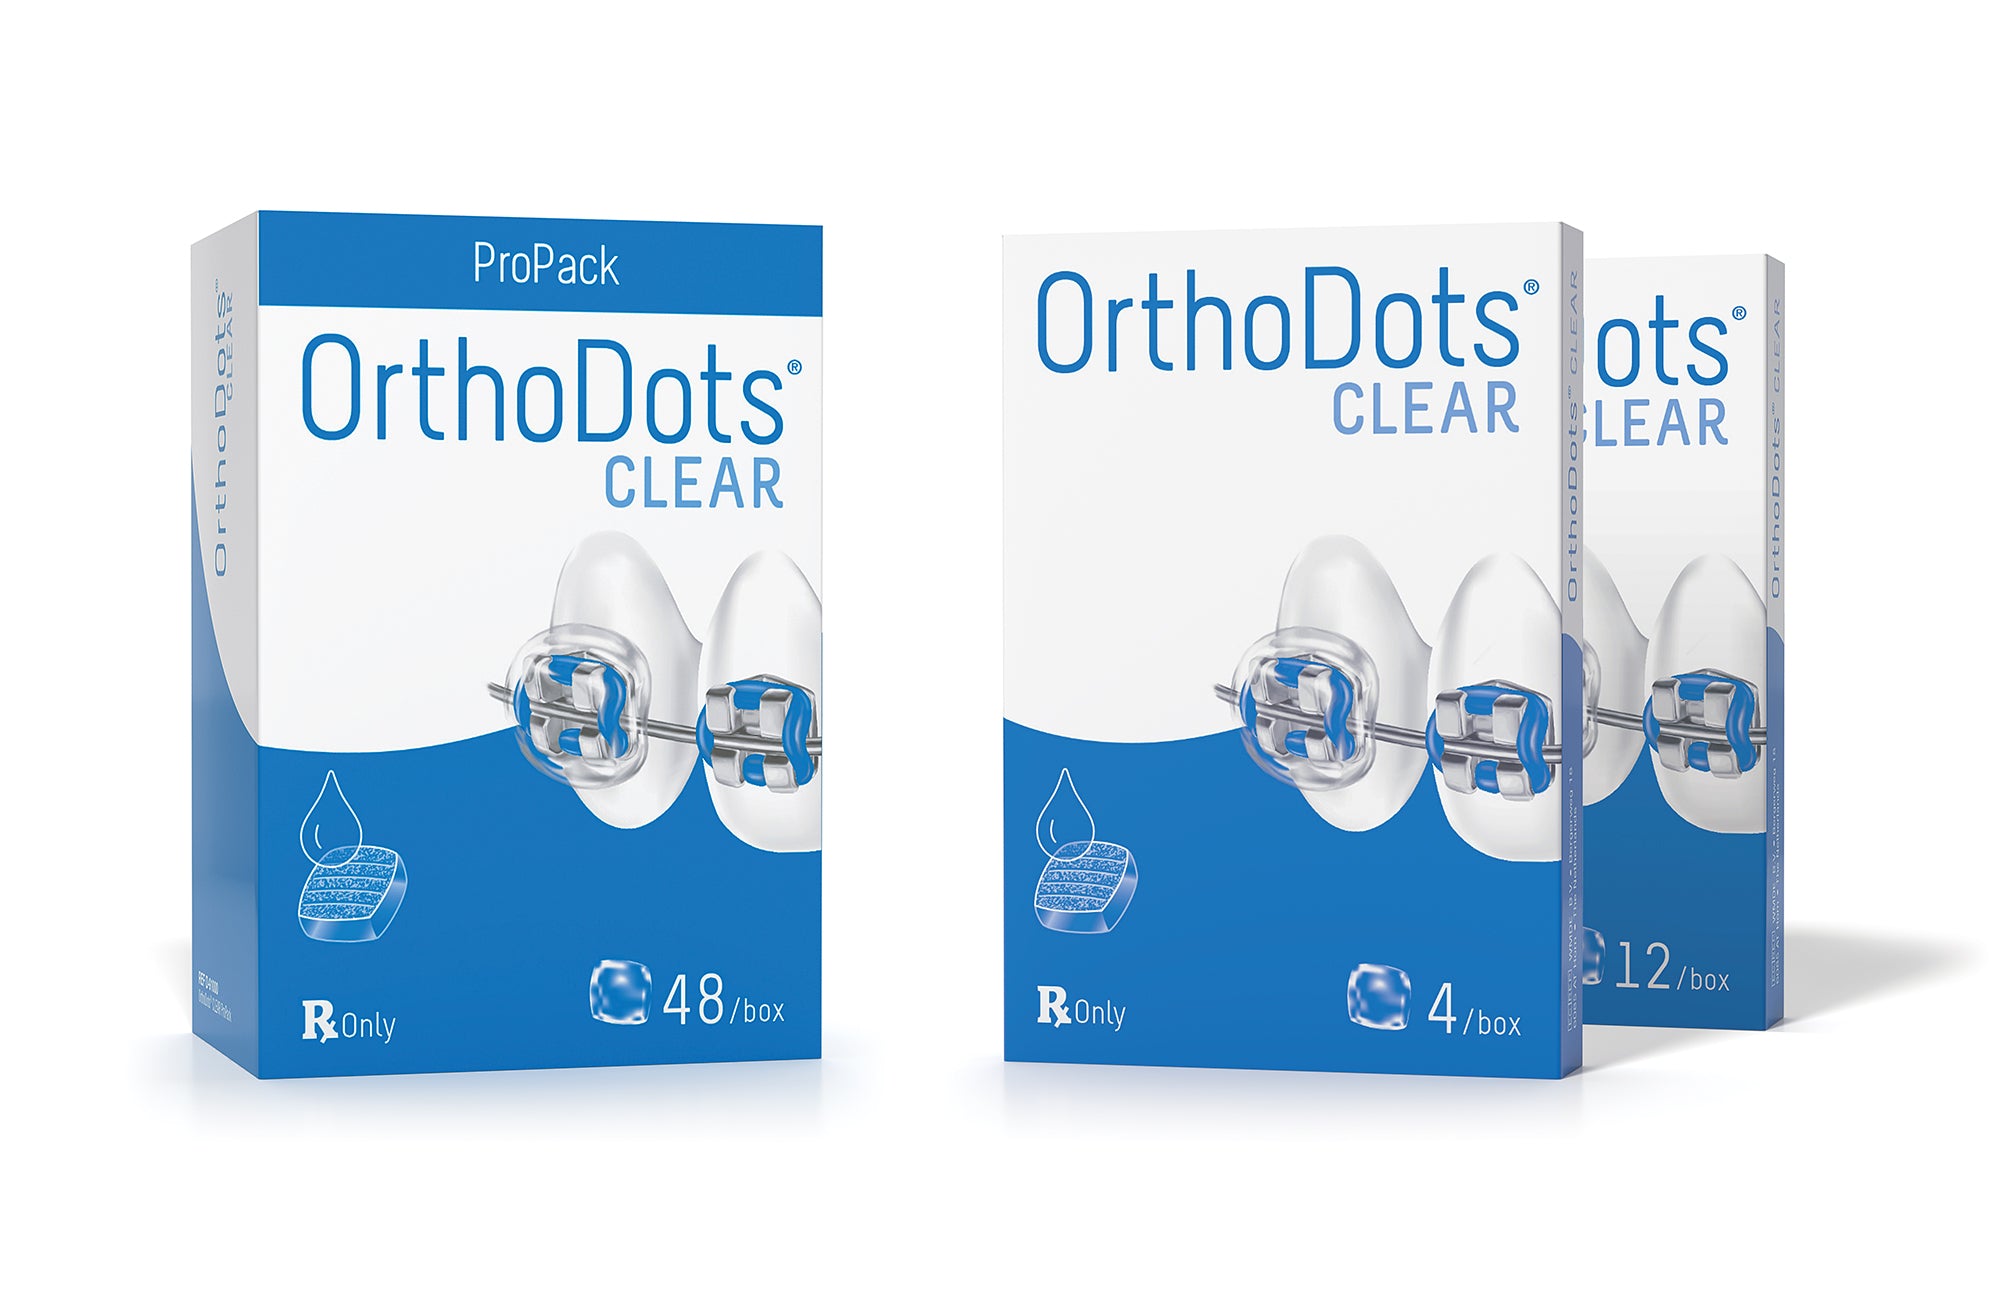 Orthodots Cleat ProPack Image